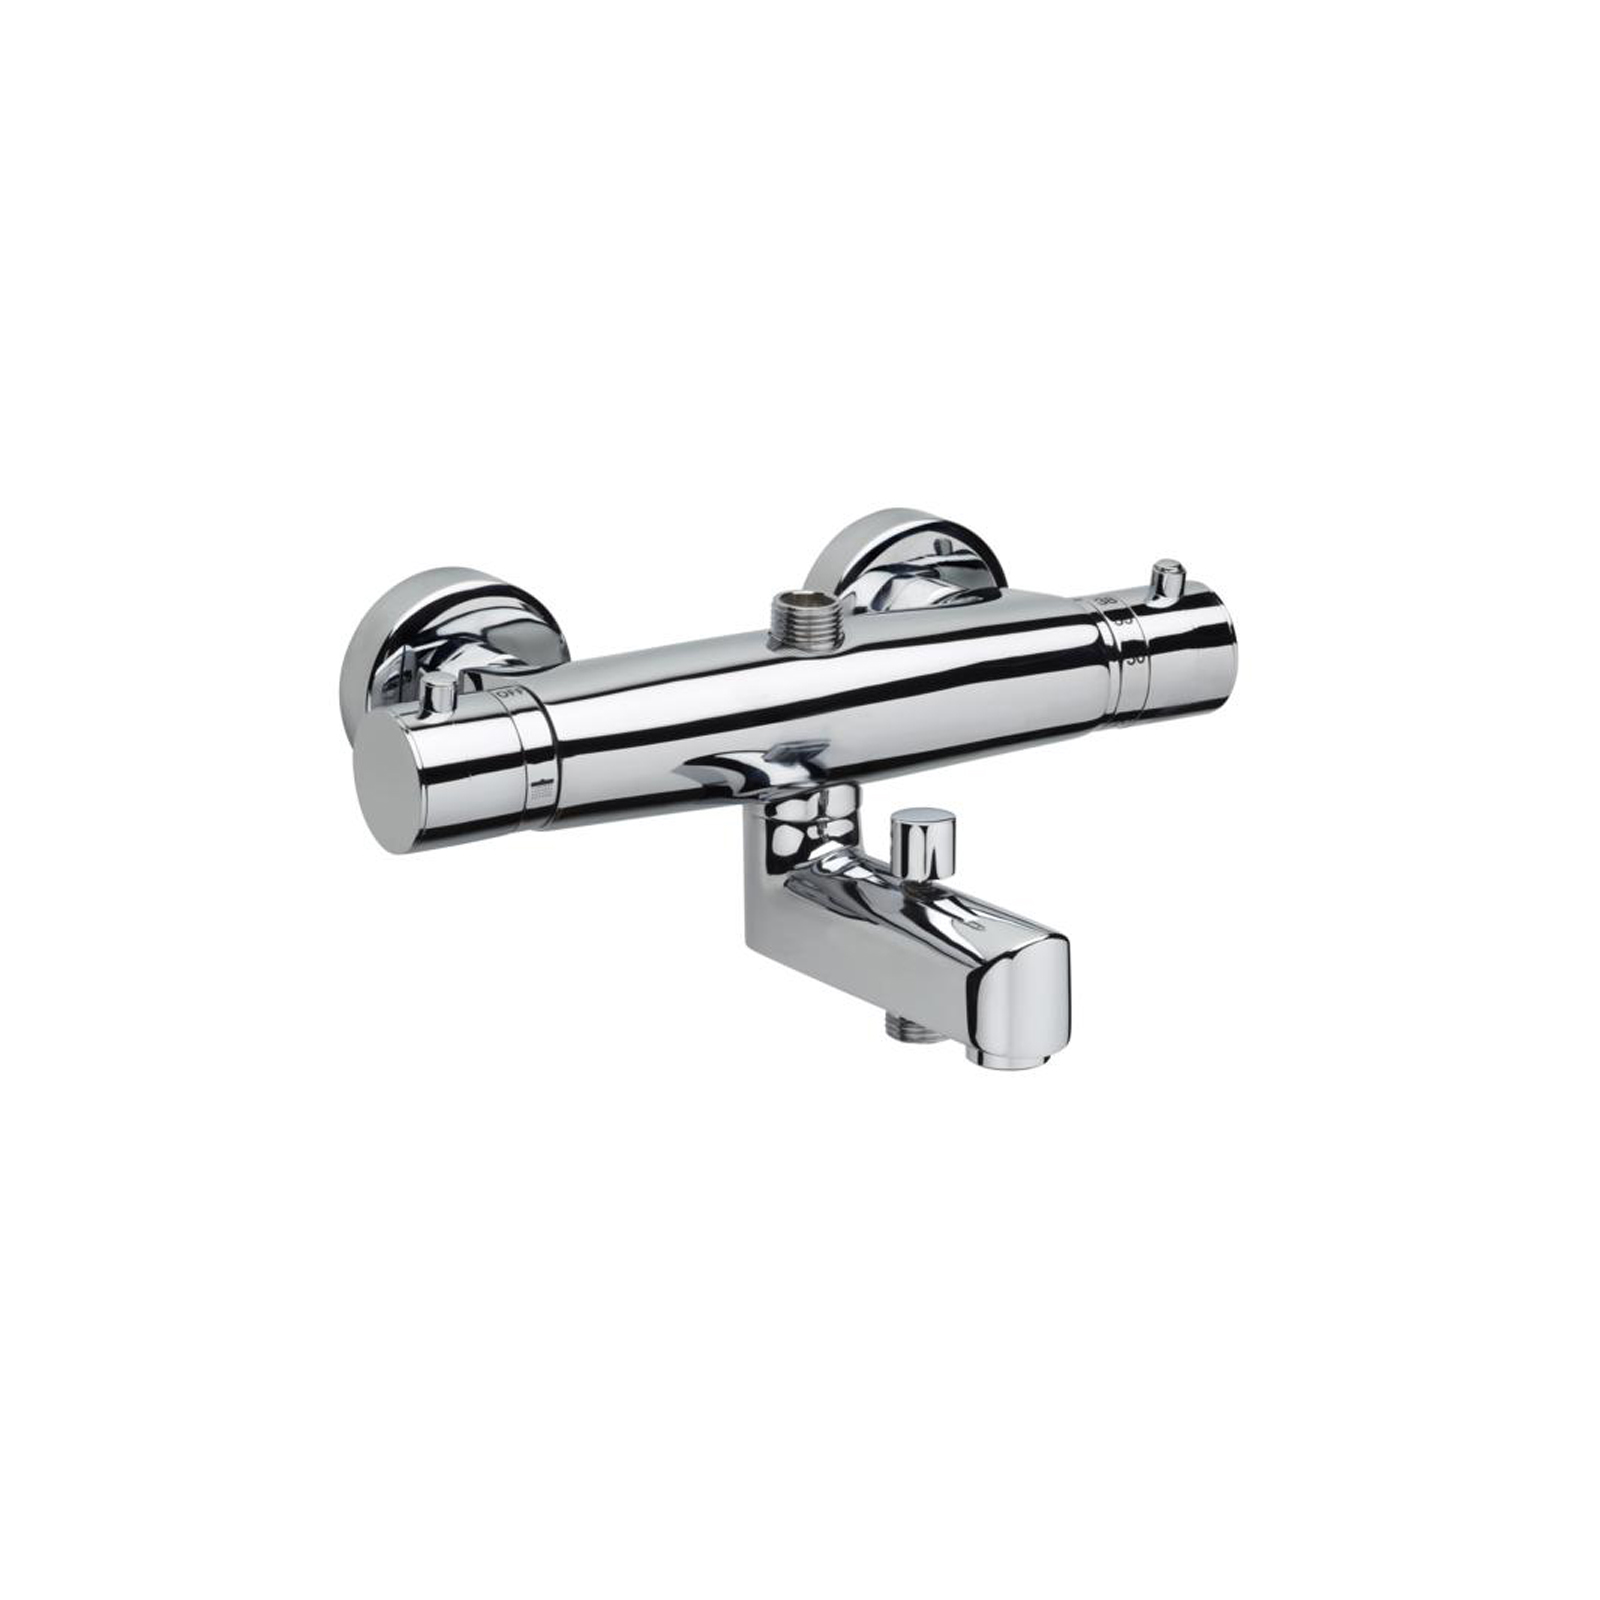 Thermostatic bathtub mixer with automatic diverter